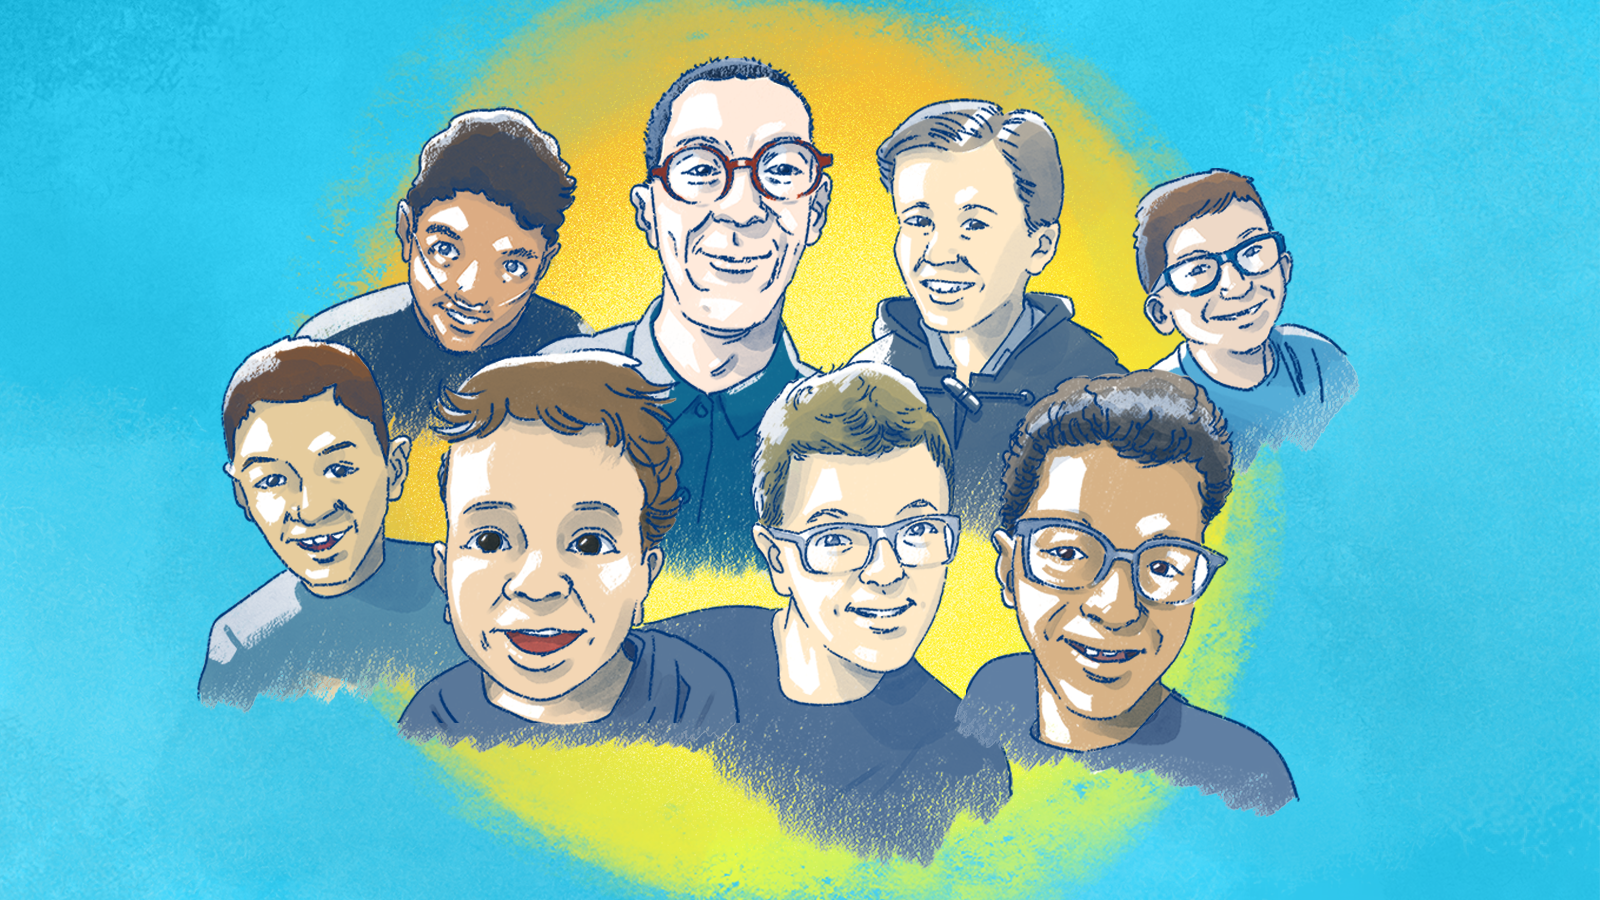 Illustrations of a diverse group of male individuals.